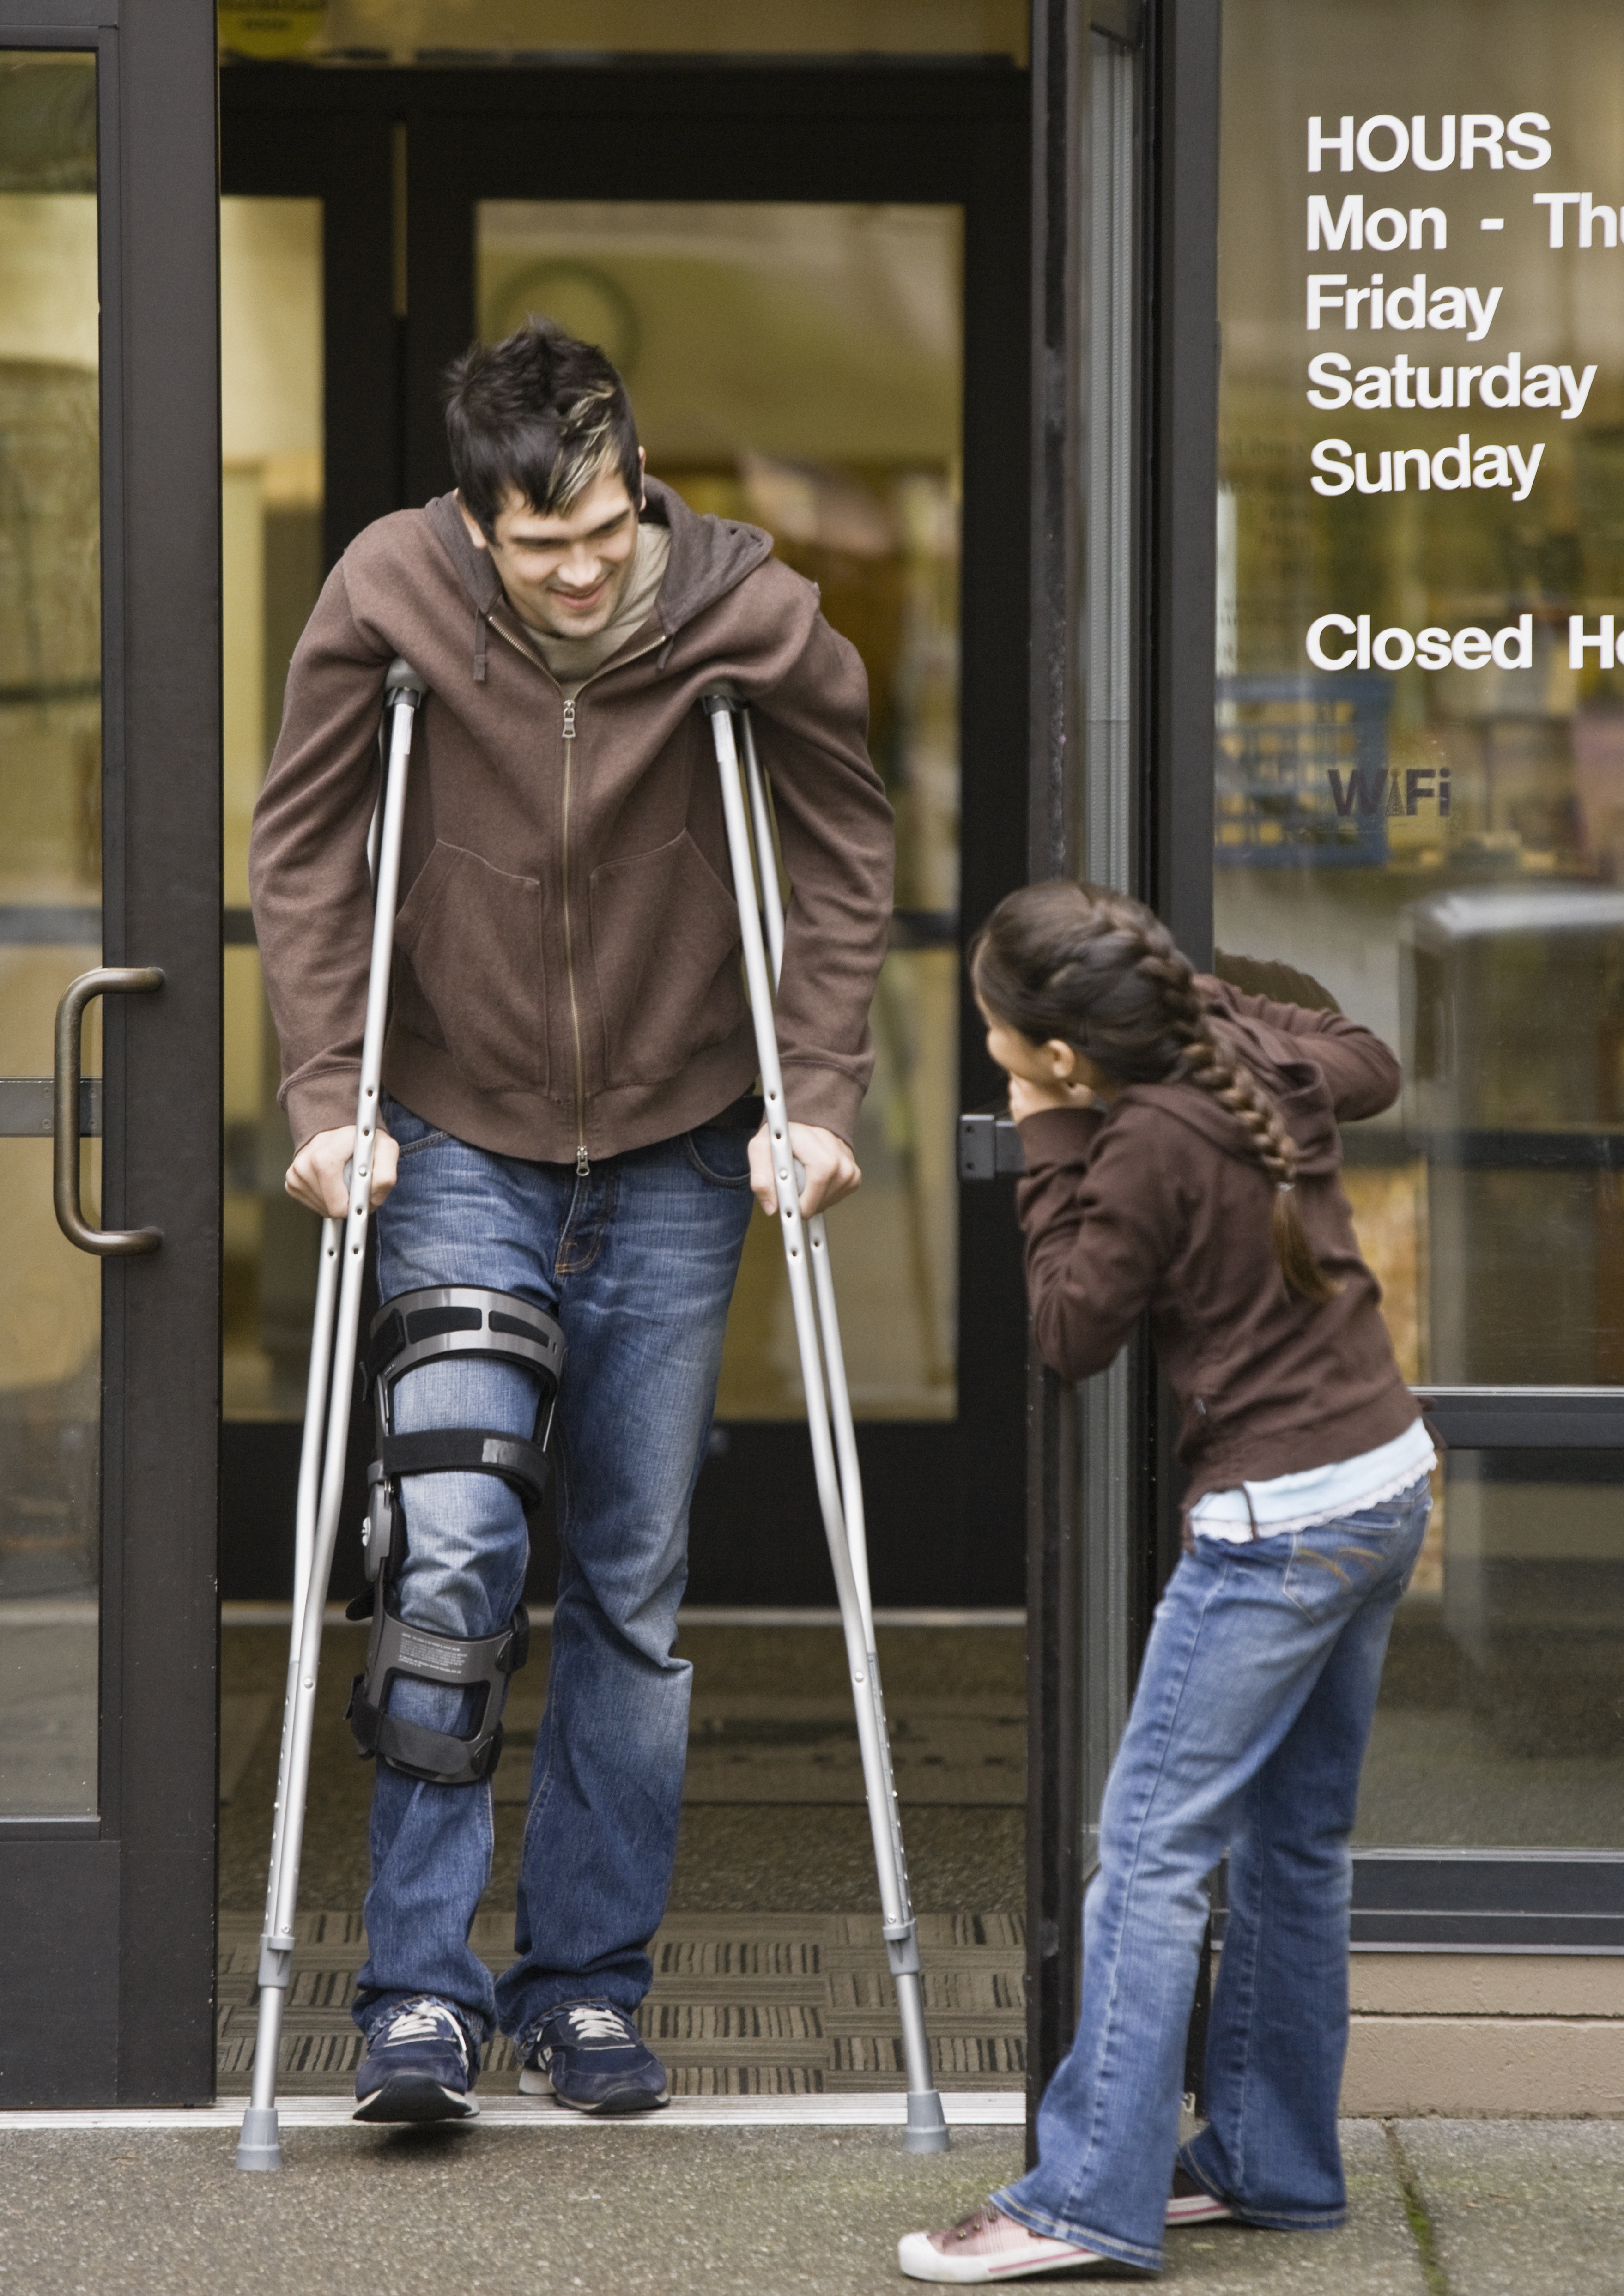 A little girl holding the door for a man on crutches. | Source: Getty Images